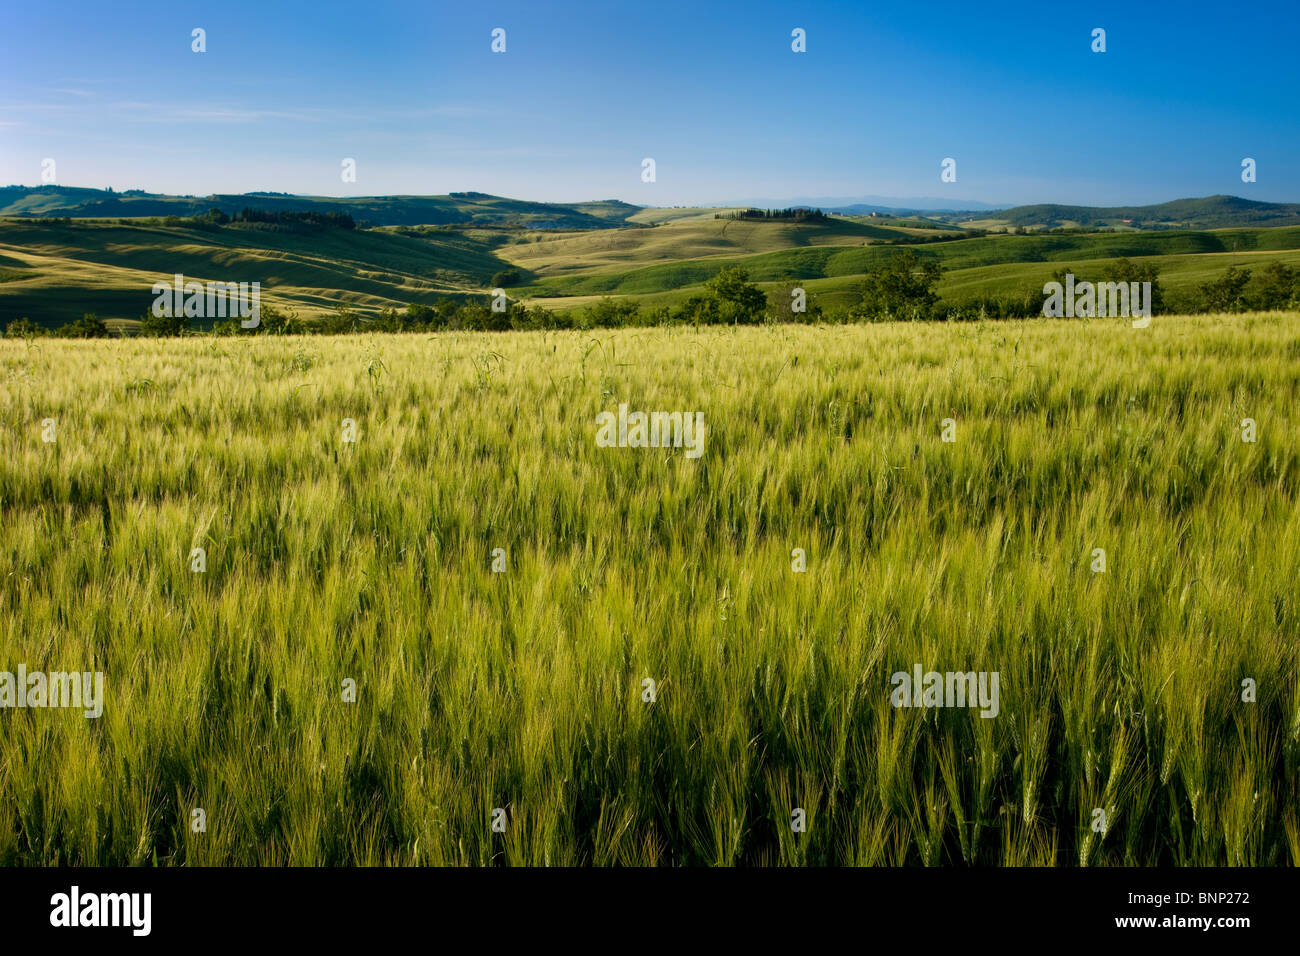 Wheat field and Tuscan countryside near San Quirico in the Val d'Orcia, Italy Stock Photo